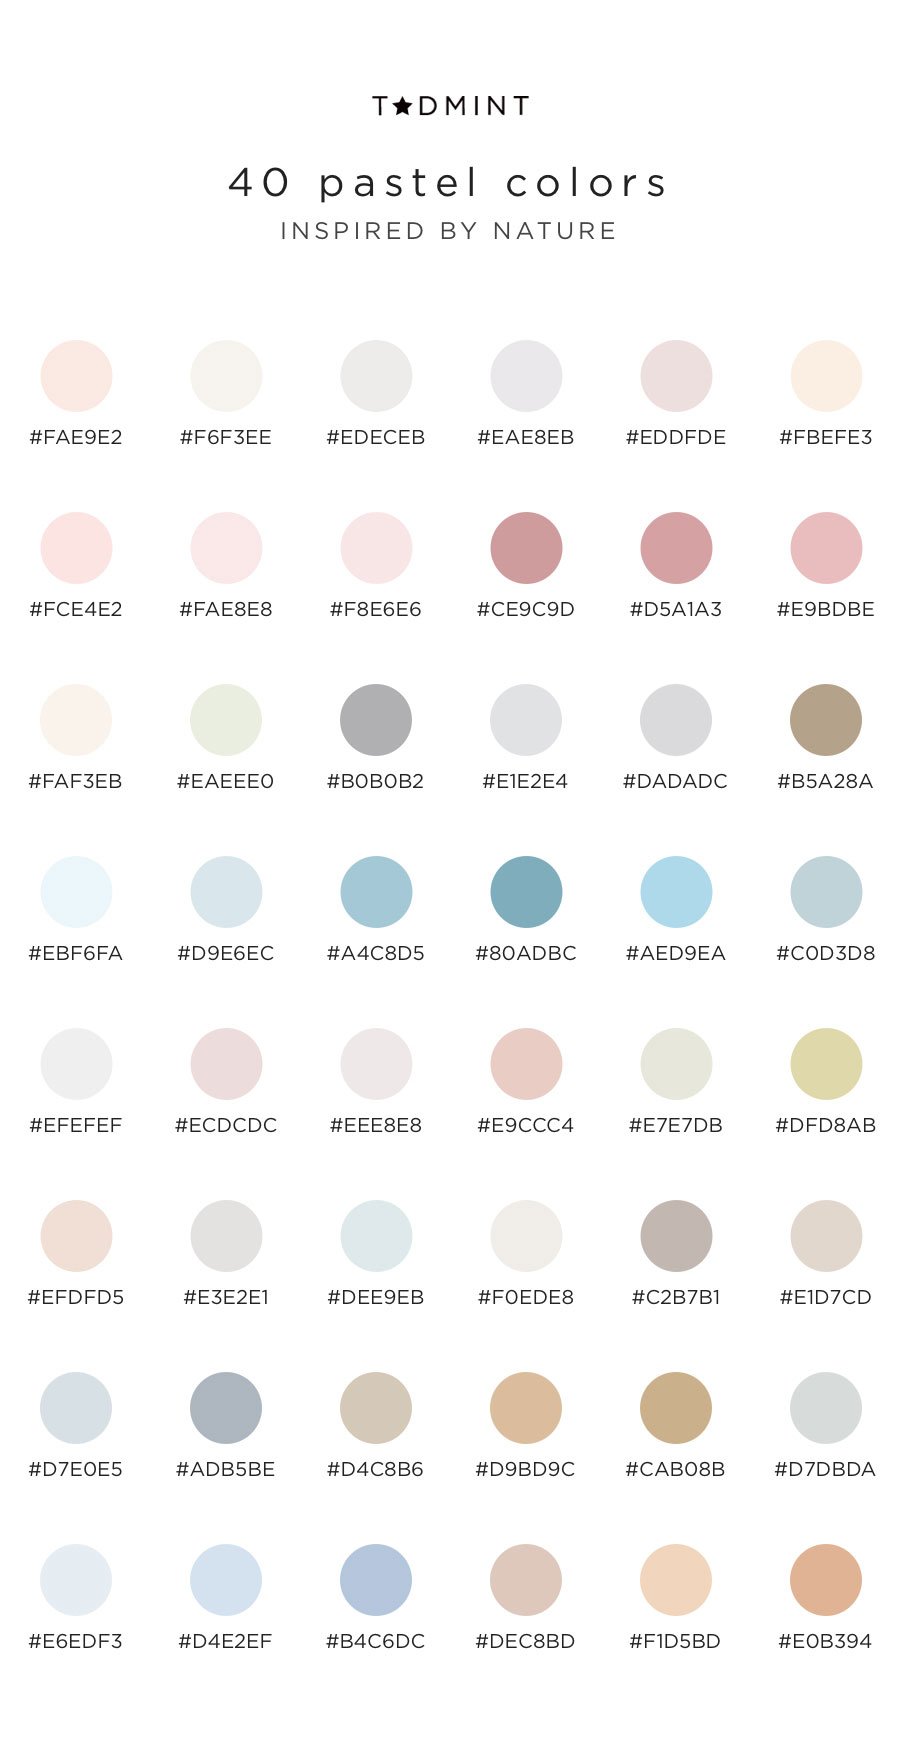 40 pastel colors inspired by nature